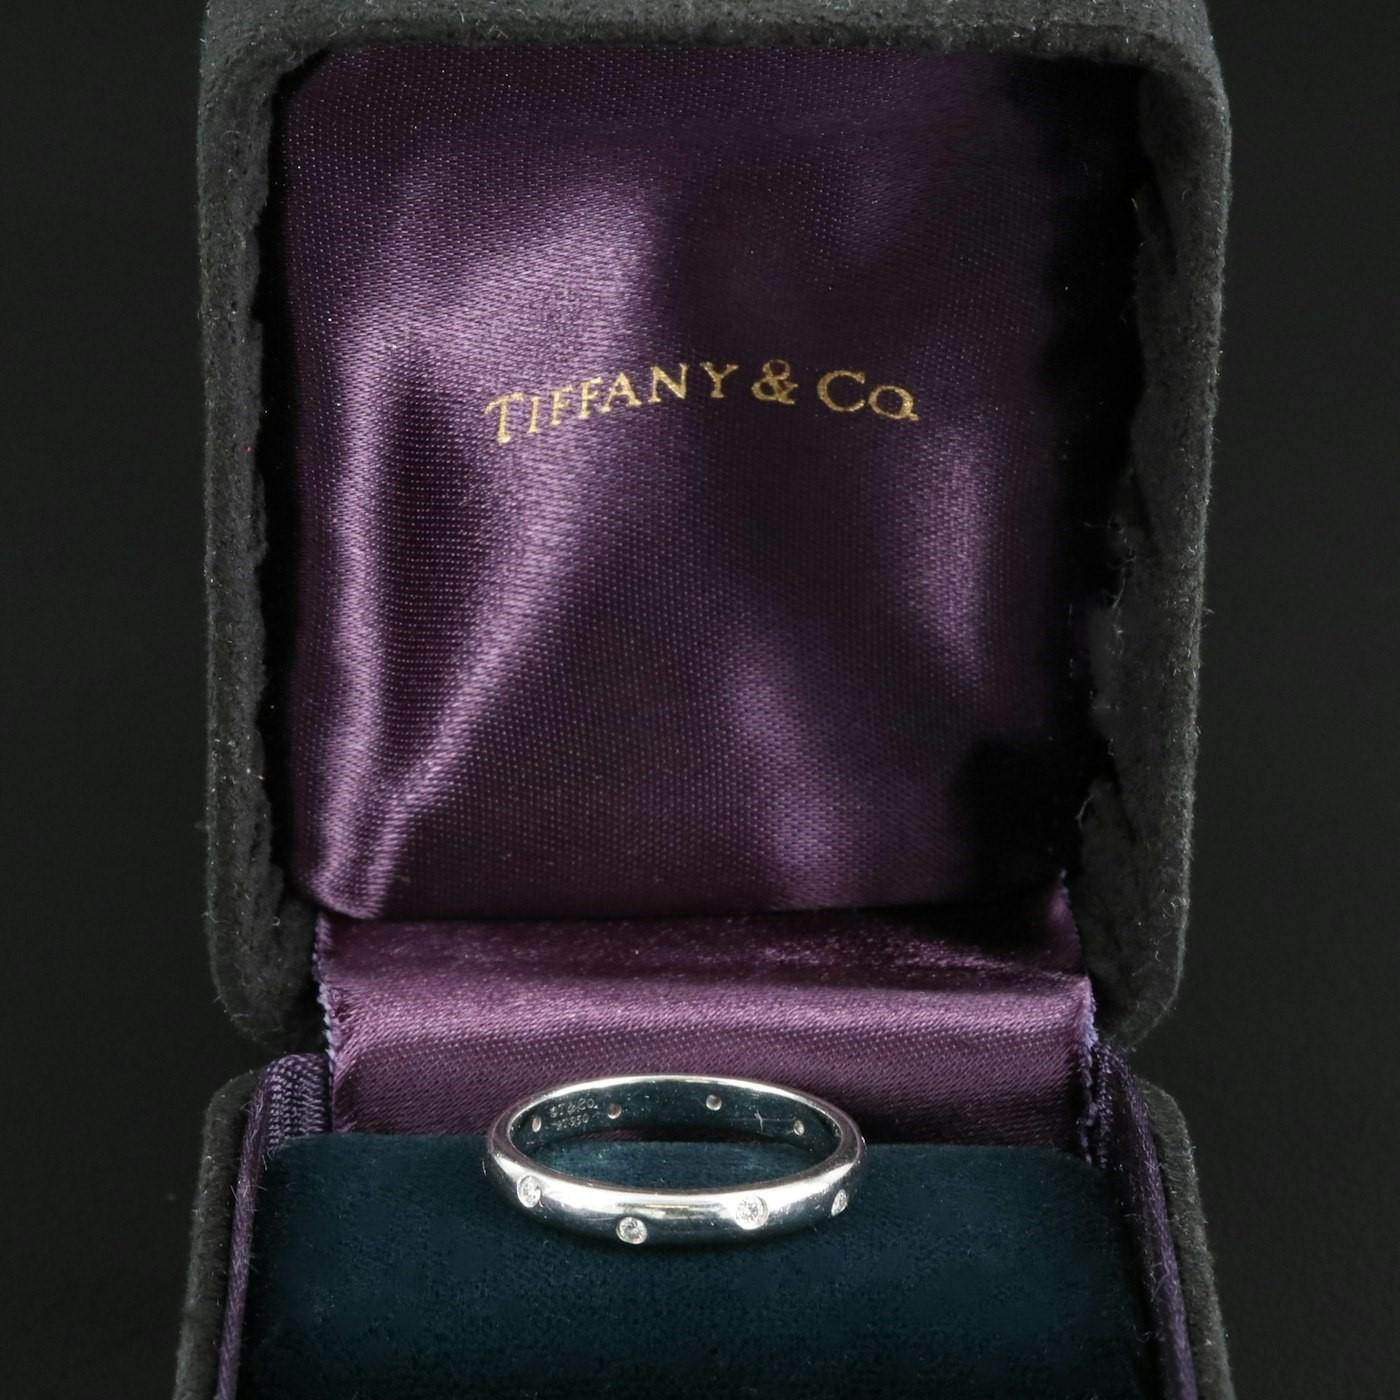 A Stunning TIFFANY & Co. Etoile Platinum Diamond Band Ring

$2100 Retail
Size 6.75

Brand/Designer:Tiffany & Co.
Materials:Platinum
Ring Size:6.75
Hallmarks:©T&Co. PT 950
Total Weight (grams):4.50
Additional Information:Box is included
Primary